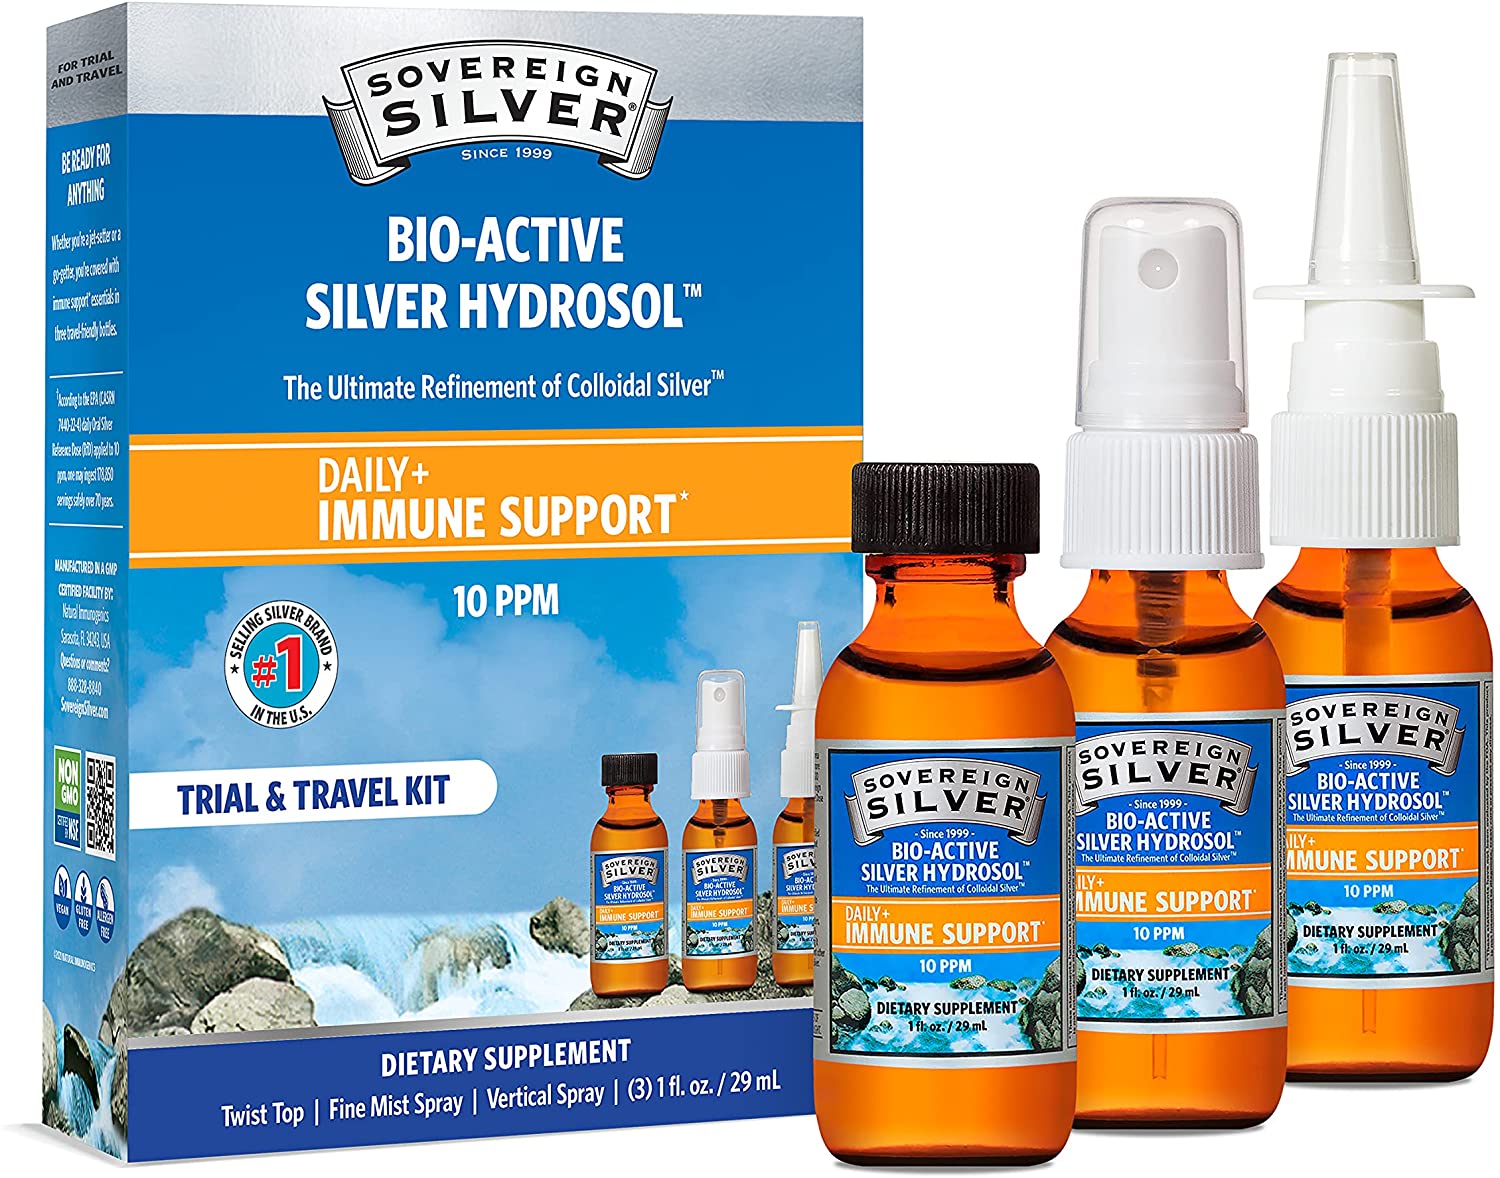 Sovereign Silver Bio-Active Silver Hydrosol - Trial & Travel Kit